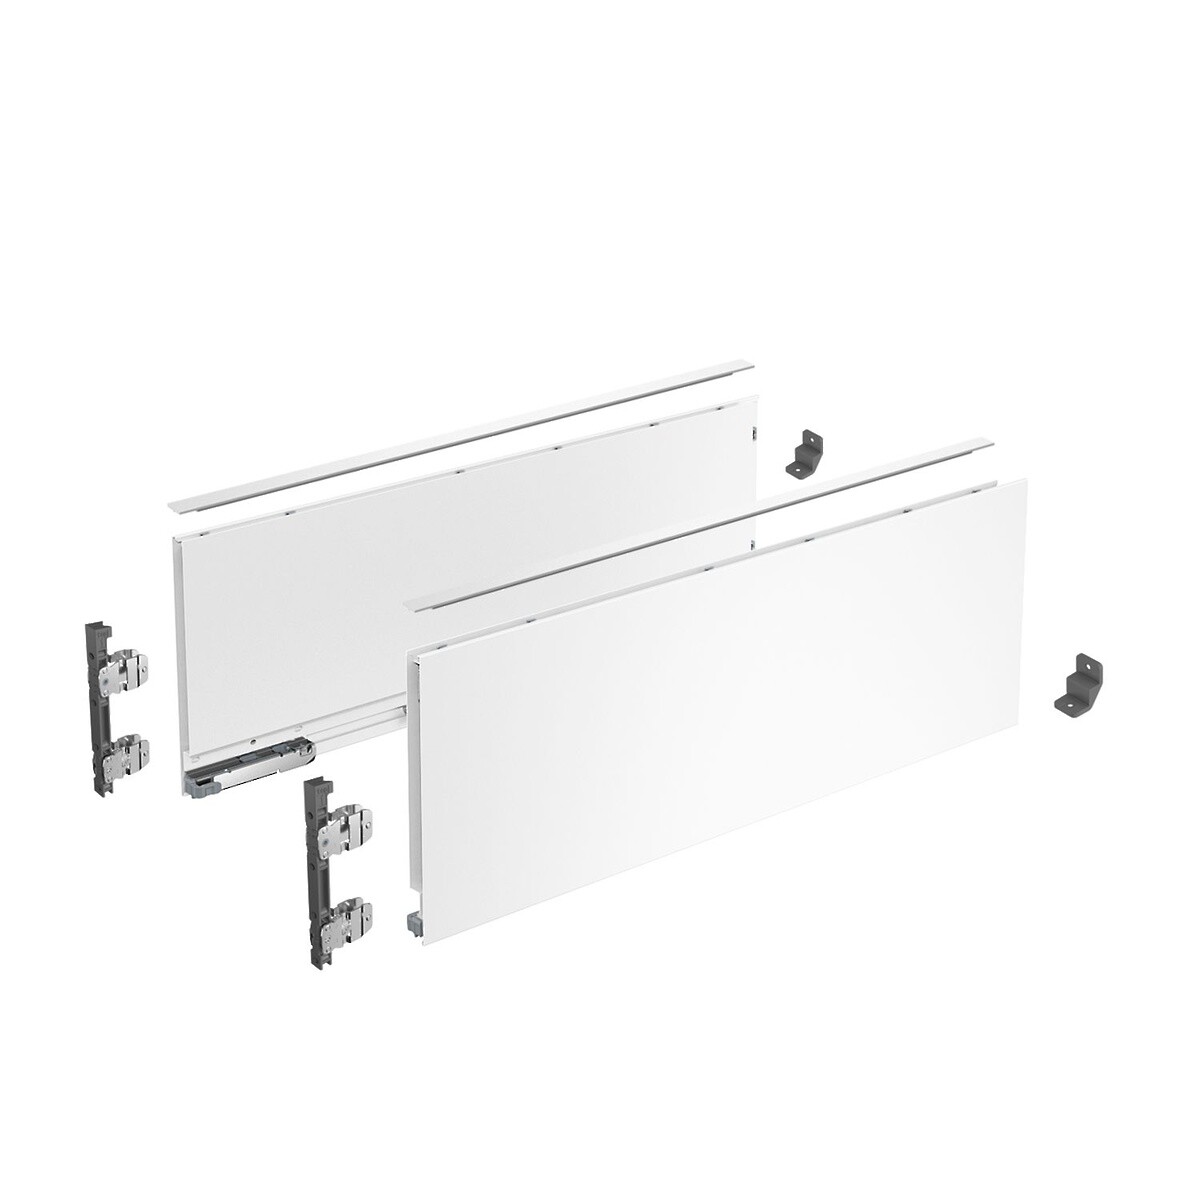 AvanTech YOU Drawer side profile set, height 187 mm x NL 270 mm, White, Left and Right